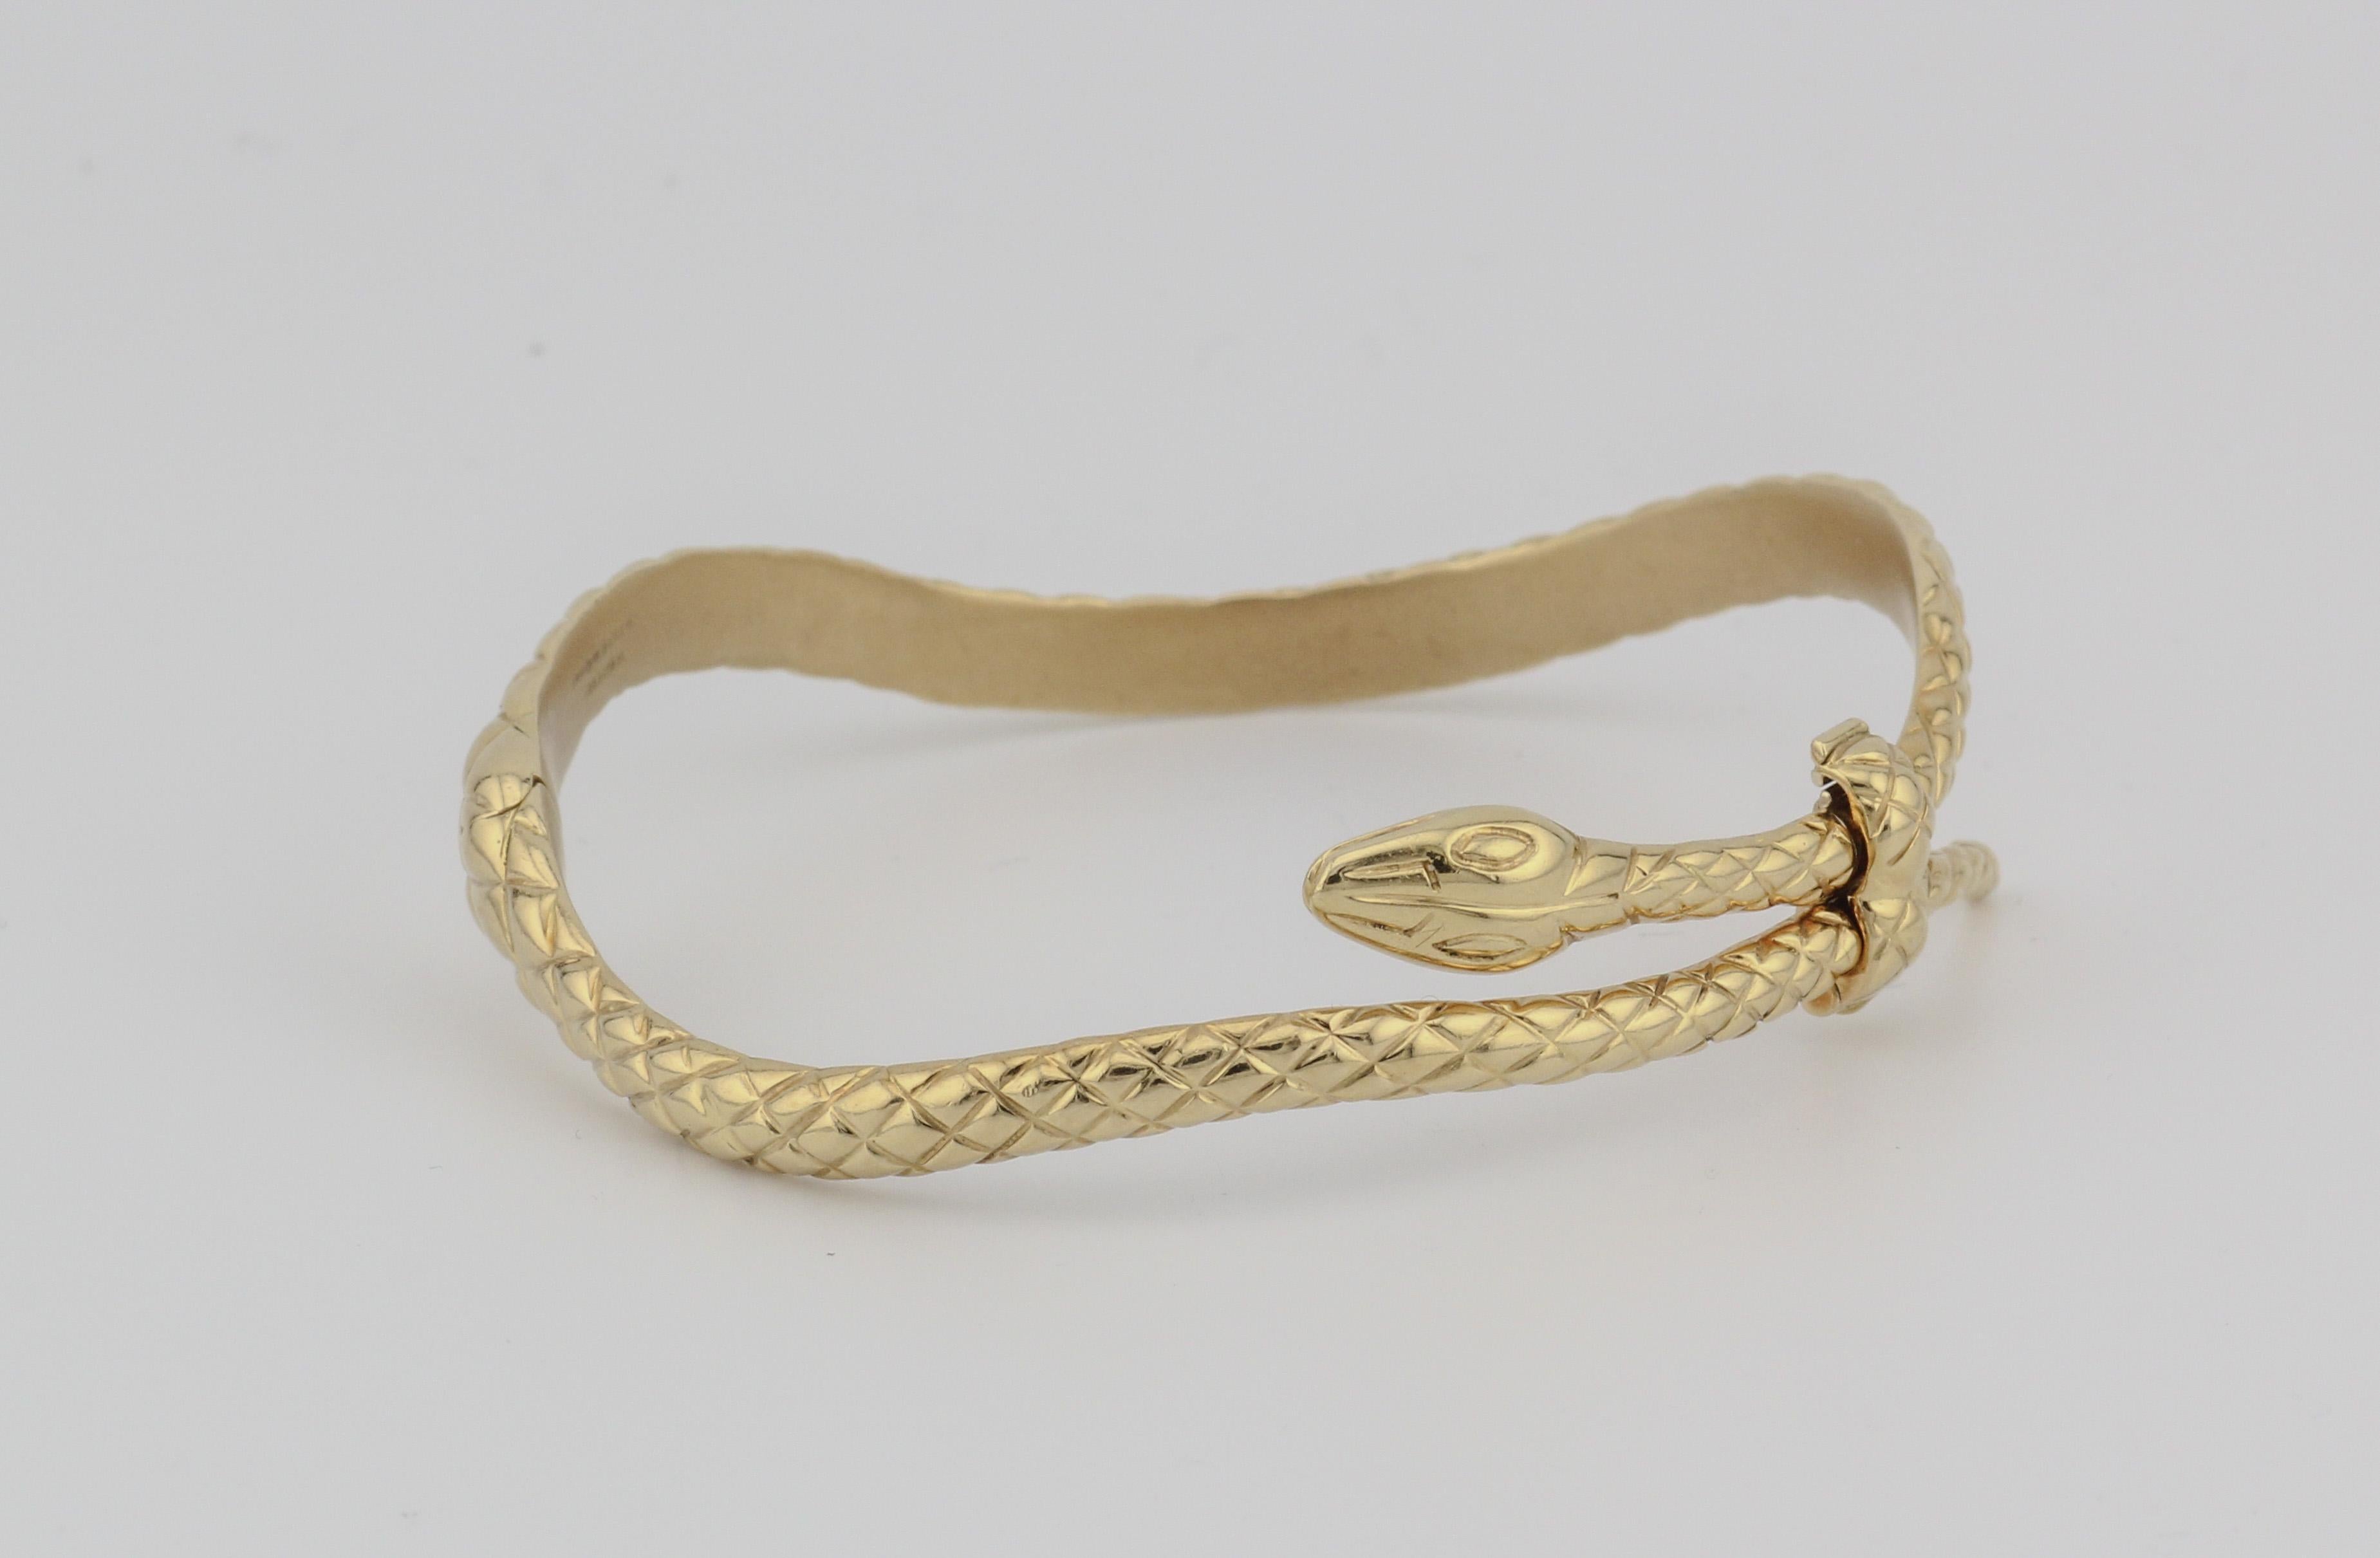 The Tom Ford 18k Yellow Gold Snake Bangle Bracelet is an opulent and striking piece of jewelry that exemplifies sophistication and bold design. This exquisite bracelet is a testament to the renowned fashion designer's commitment to luxurious